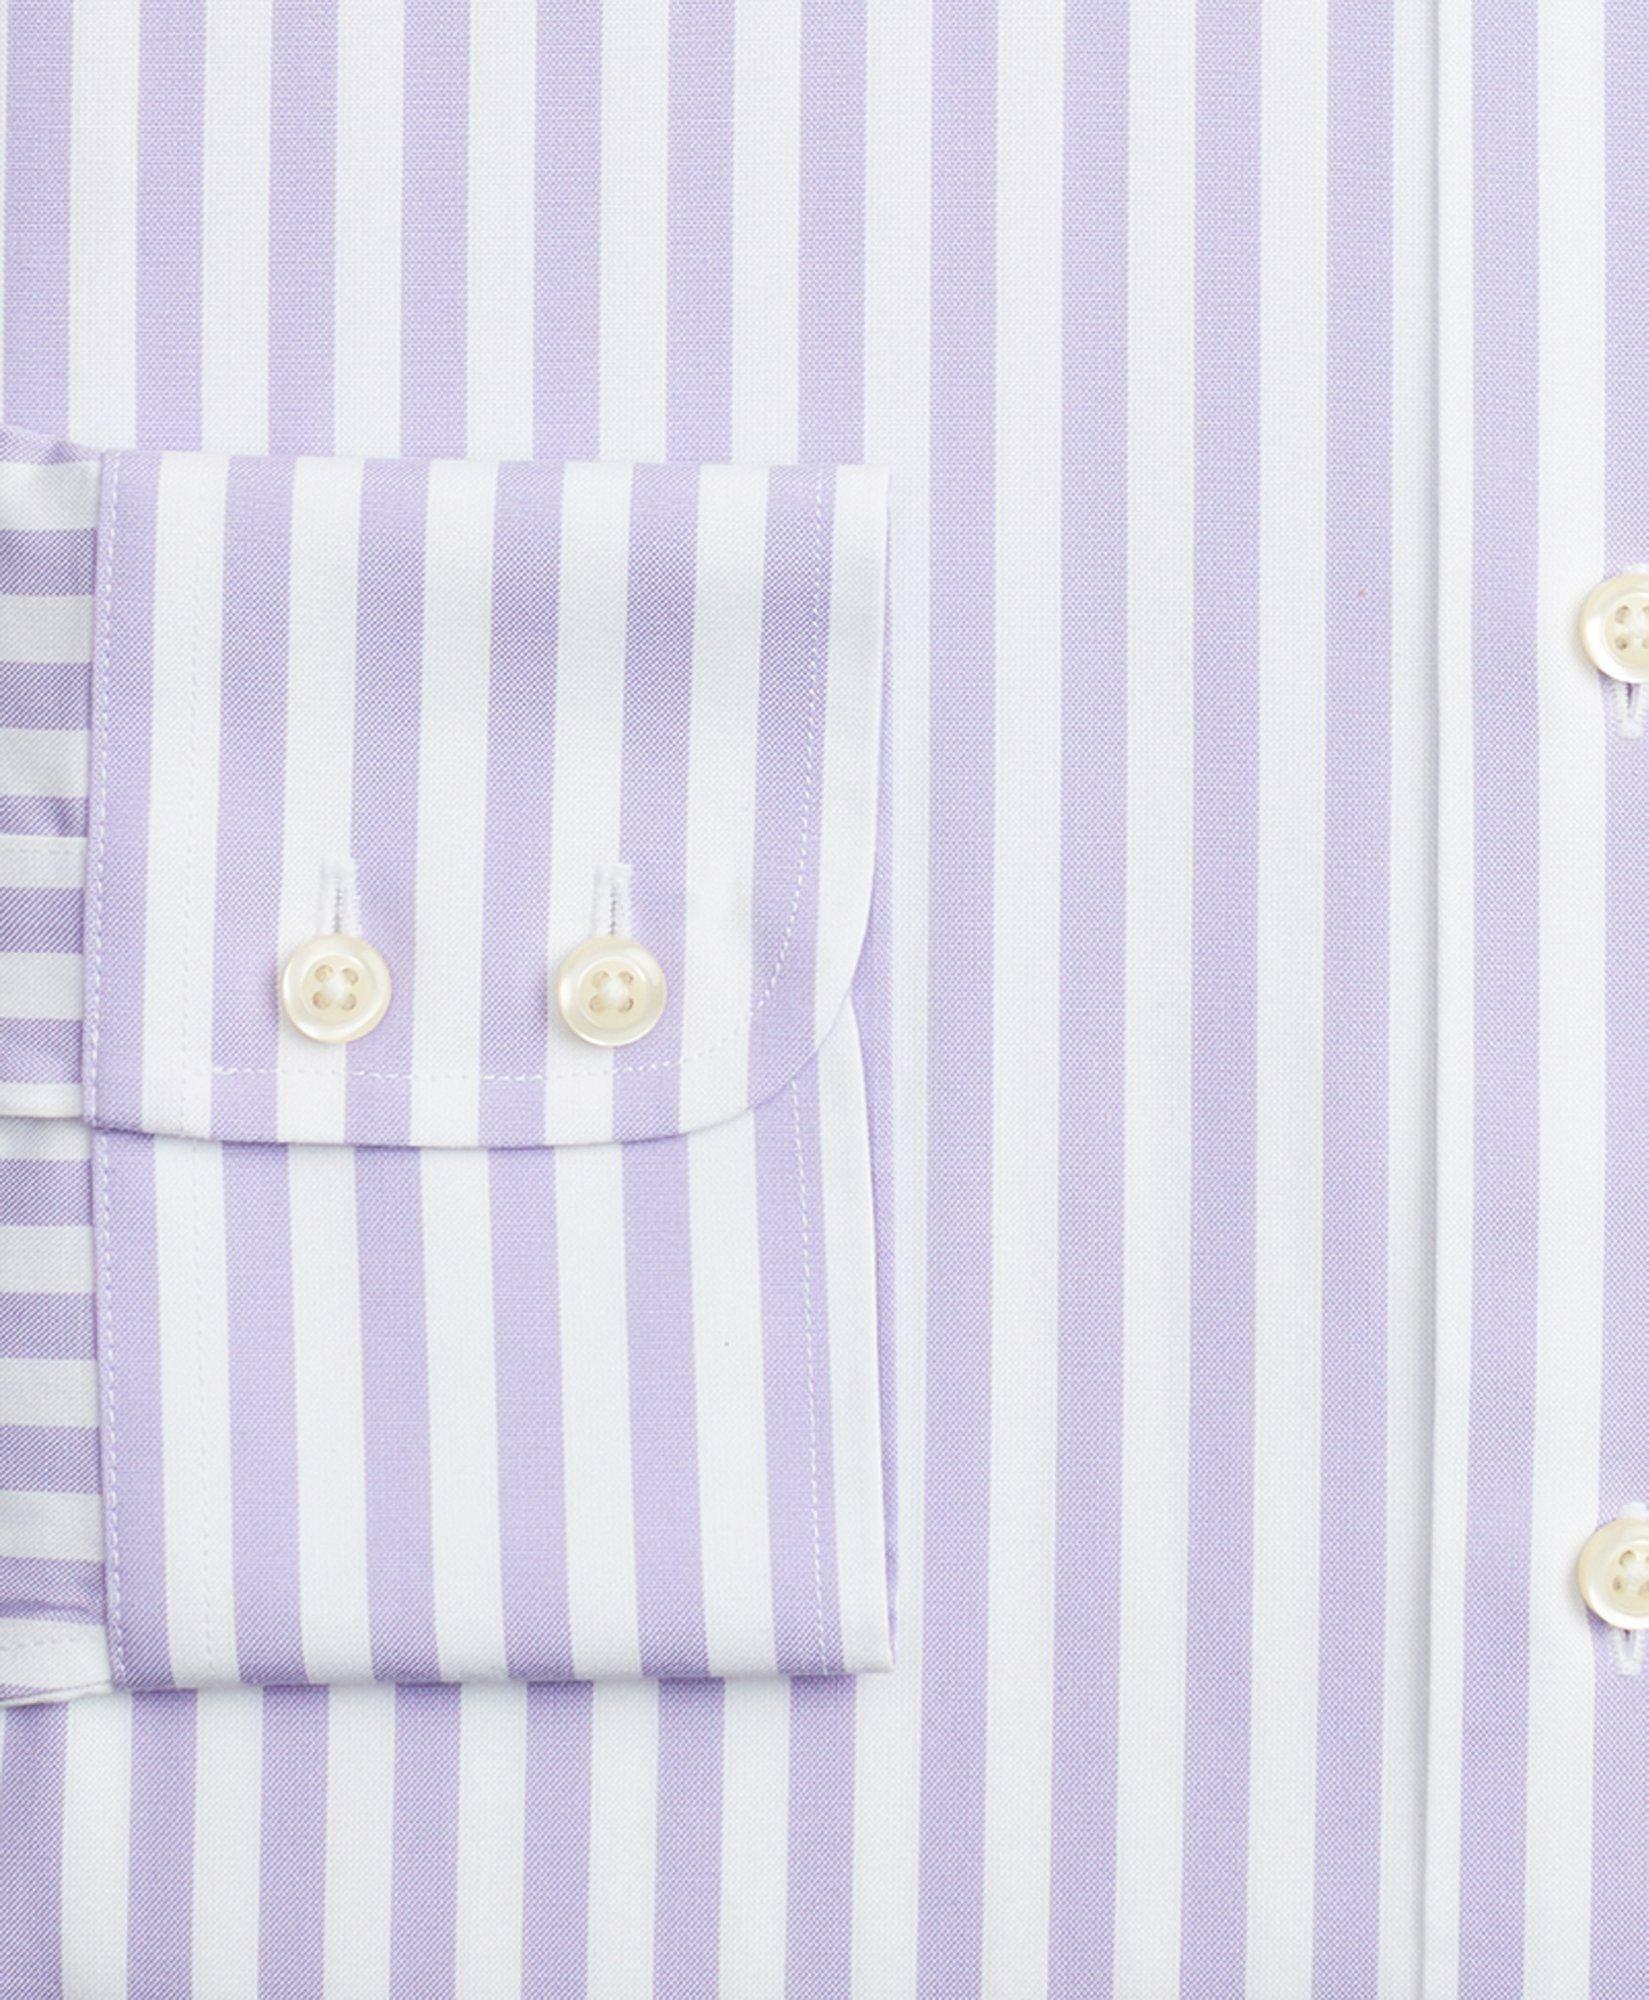 Brooks Brothers Men's Madison Relaxed-Fit Dress Shirt, Non-Iron Stripe | Purple